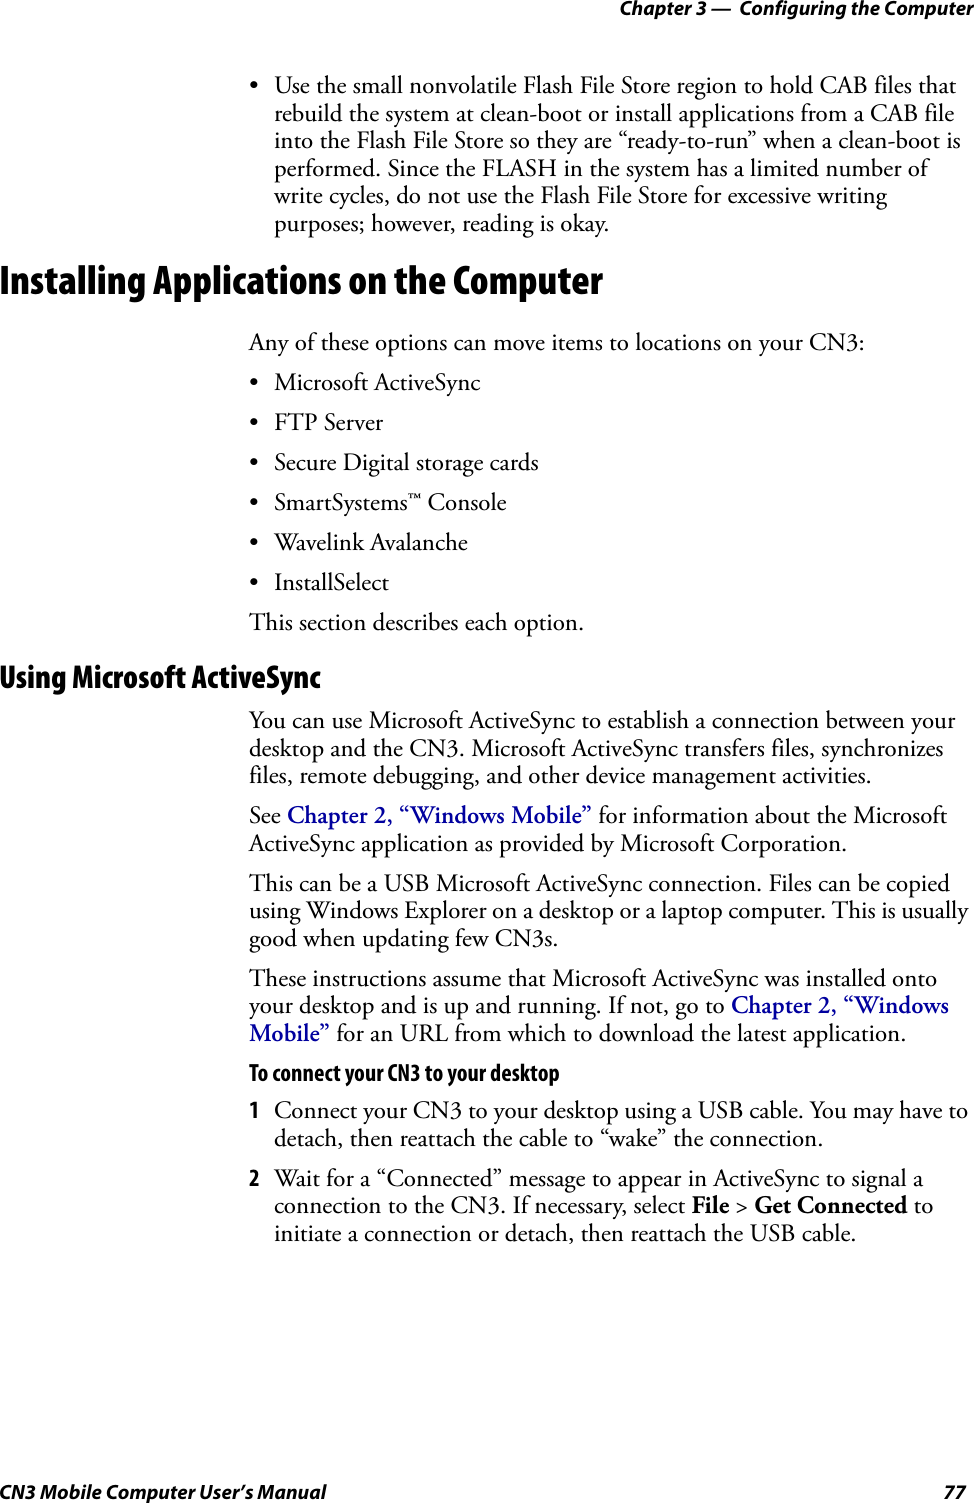 Chapter 3 —  Configuring the ComputerCN3 Mobile Computer User’s Manual 77• Use the small nonvolatile Flash File Store region to hold CAB files that rebuild the system at clean-boot or install applications from a CAB file into the Flash File Store so they are “ready-to-run” when a clean-boot is performed. Since the FLASH in the system has a limited number of write cycles, do not use the Flash File Store for excessive writing purposes; however, reading is okay.Installing Applications on the ComputerAny of these options can move items to locations on your CN3:• Microsoft ActiveSync • FTP Server• Secure Digital storage cards• SmartSystems™ Console• Wavelink Avalanche• InstallSelect This section describes each option.Using Microsoft ActiveSyncYou can use Microsoft ActiveSync to establish a connection between your desktop and the CN3. Microsoft ActiveSync transfers files, synchronizes files, remote debugging, and other device management activities.See Chapter 2, “Windows Mobile” for information about the Microsoft ActiveSync application as provided by Microsoft Corporation.This can be a USB Microsoft ActiveSync connection. Files can be copied using Windows Explorer on a desktop or a laptop computer. This is usually good when updating few CN3s.These instructions assume that Microsoft ActiveSync was installed onto your desktop and is up and running. If not, go to Chapter 2, “Windows Mobile” for an URL from which to download the latest application.To connect your CN3 to your desktop1Connect your CN3 to your desktop using a USB cable. You may have to detach, then reattach the cable to “wake” the connection.2Wait for a “Connected” message to appear in ActiveSync to signal a connection to the CN3. If necessary, select File &gt; Get Connected to initiate a connection or detach, then reattach the USB cable.